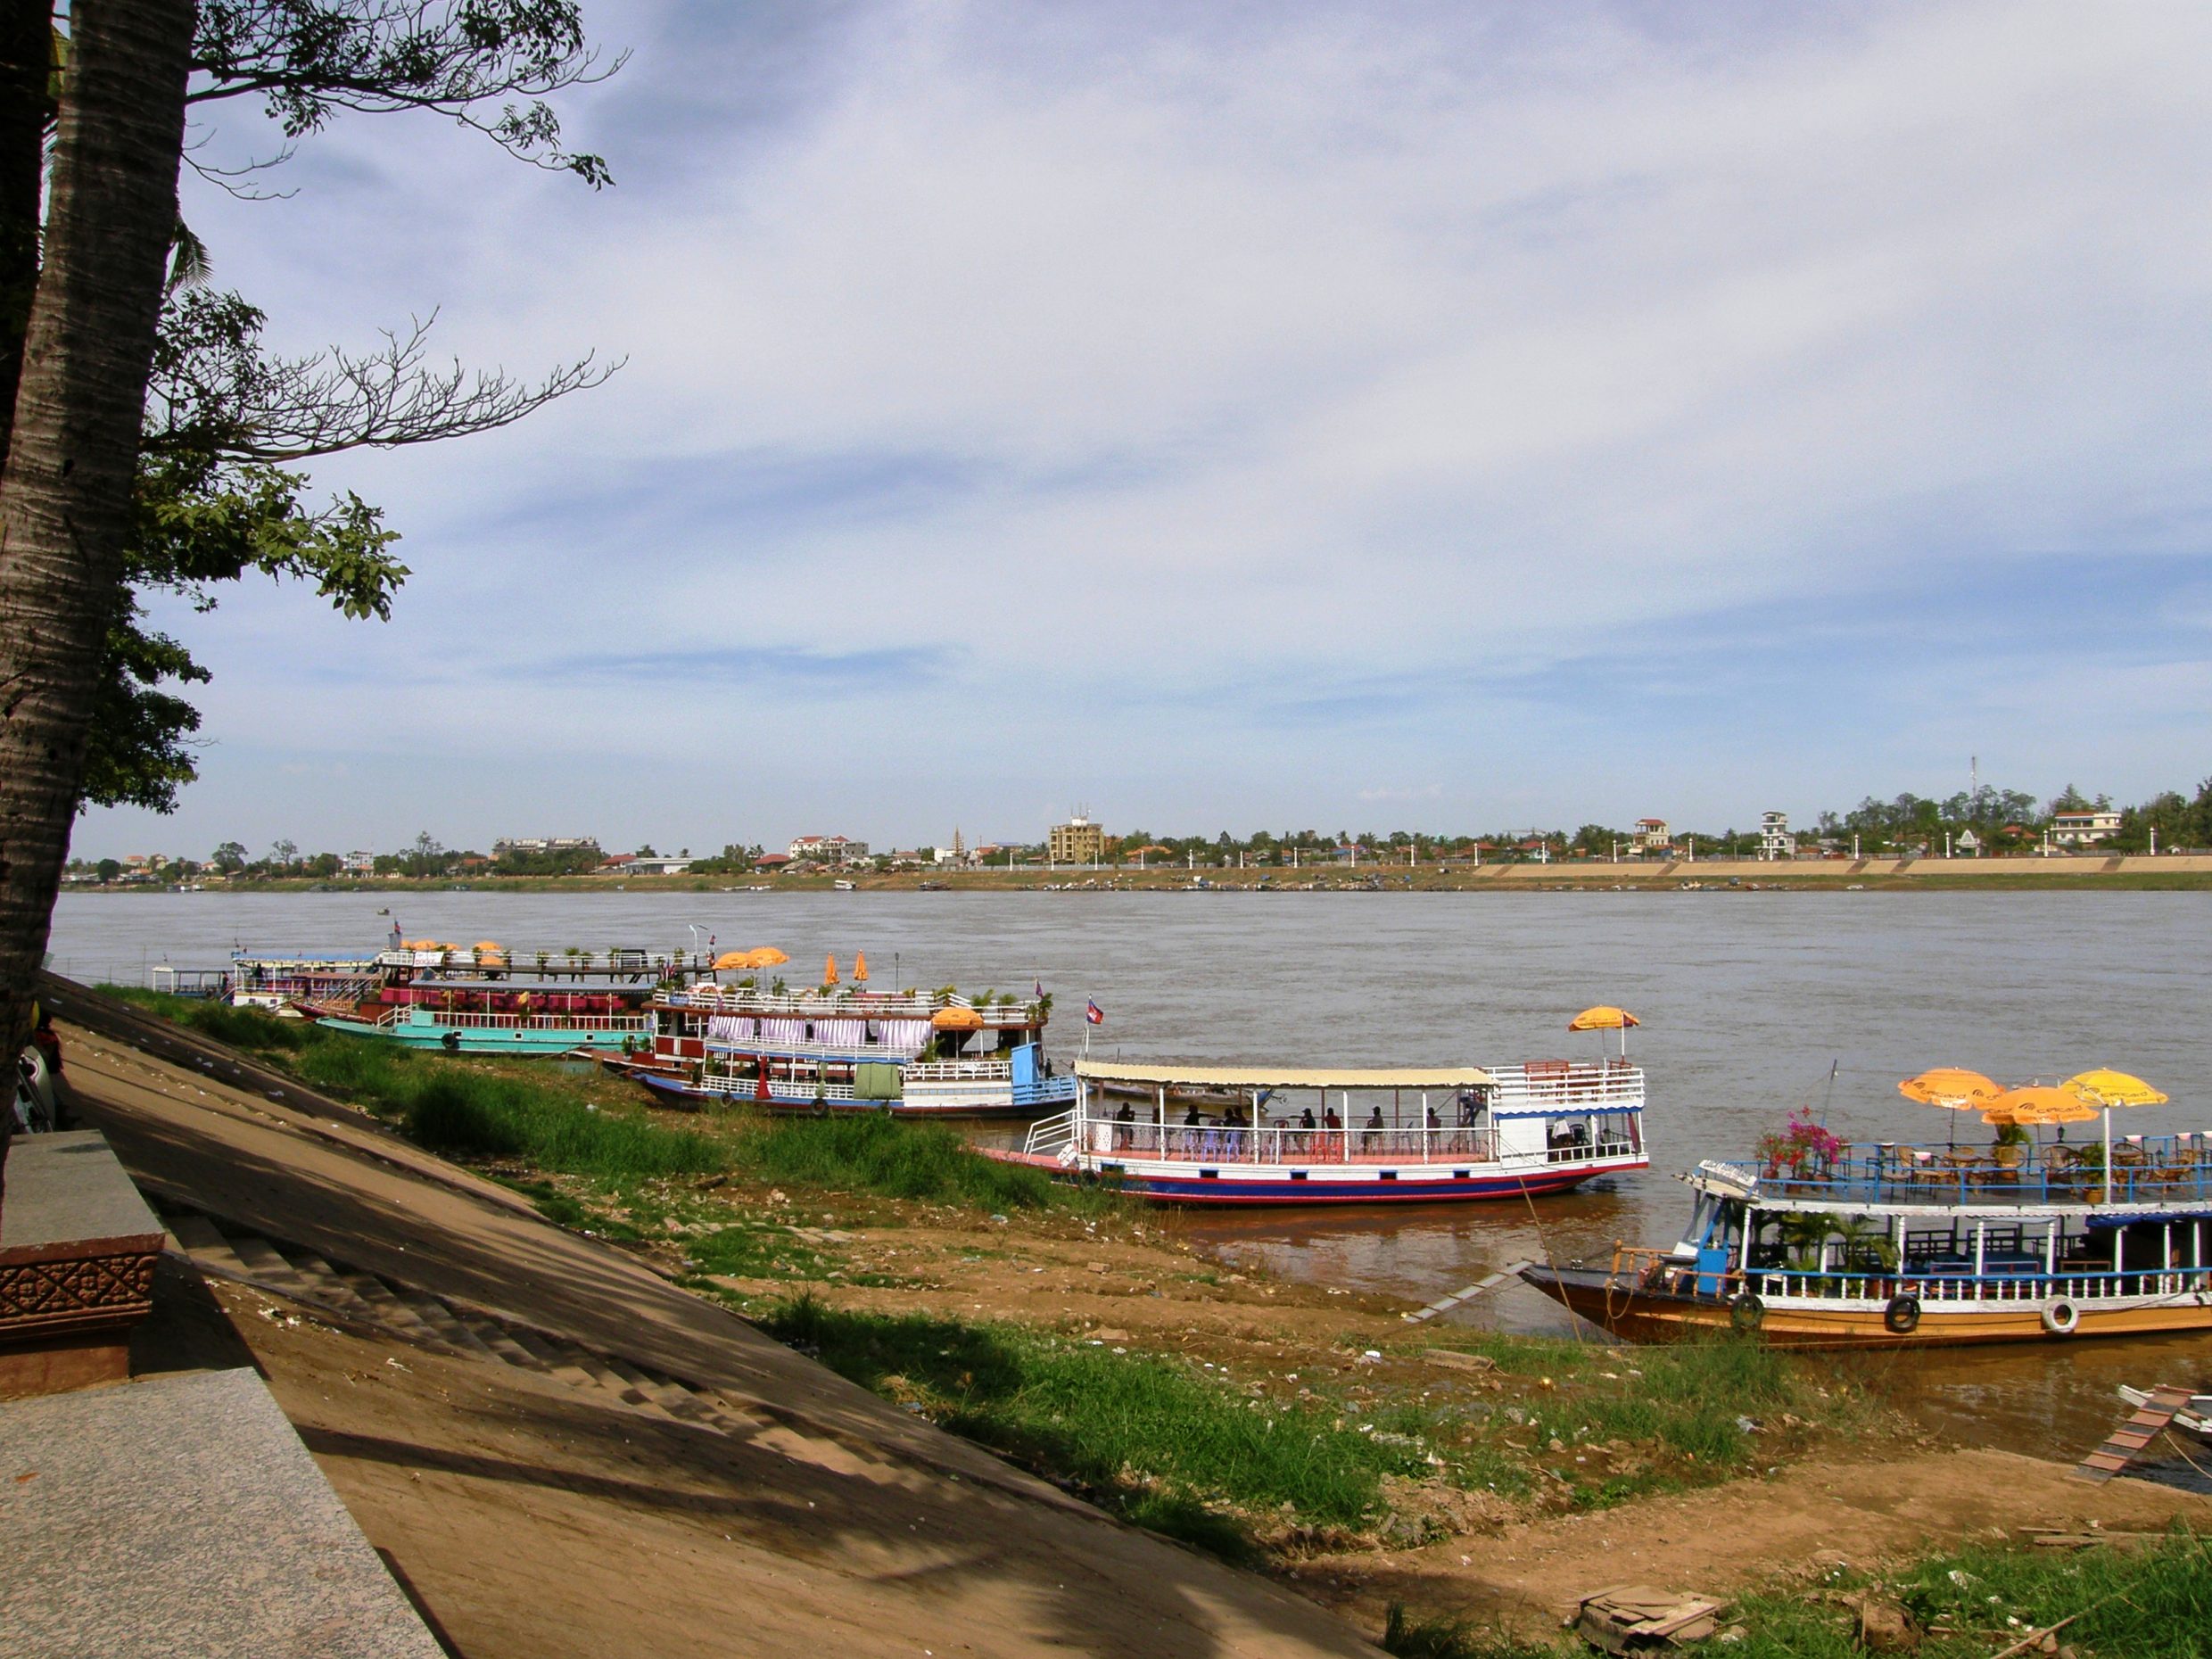 River view with boats, Phnom Penh